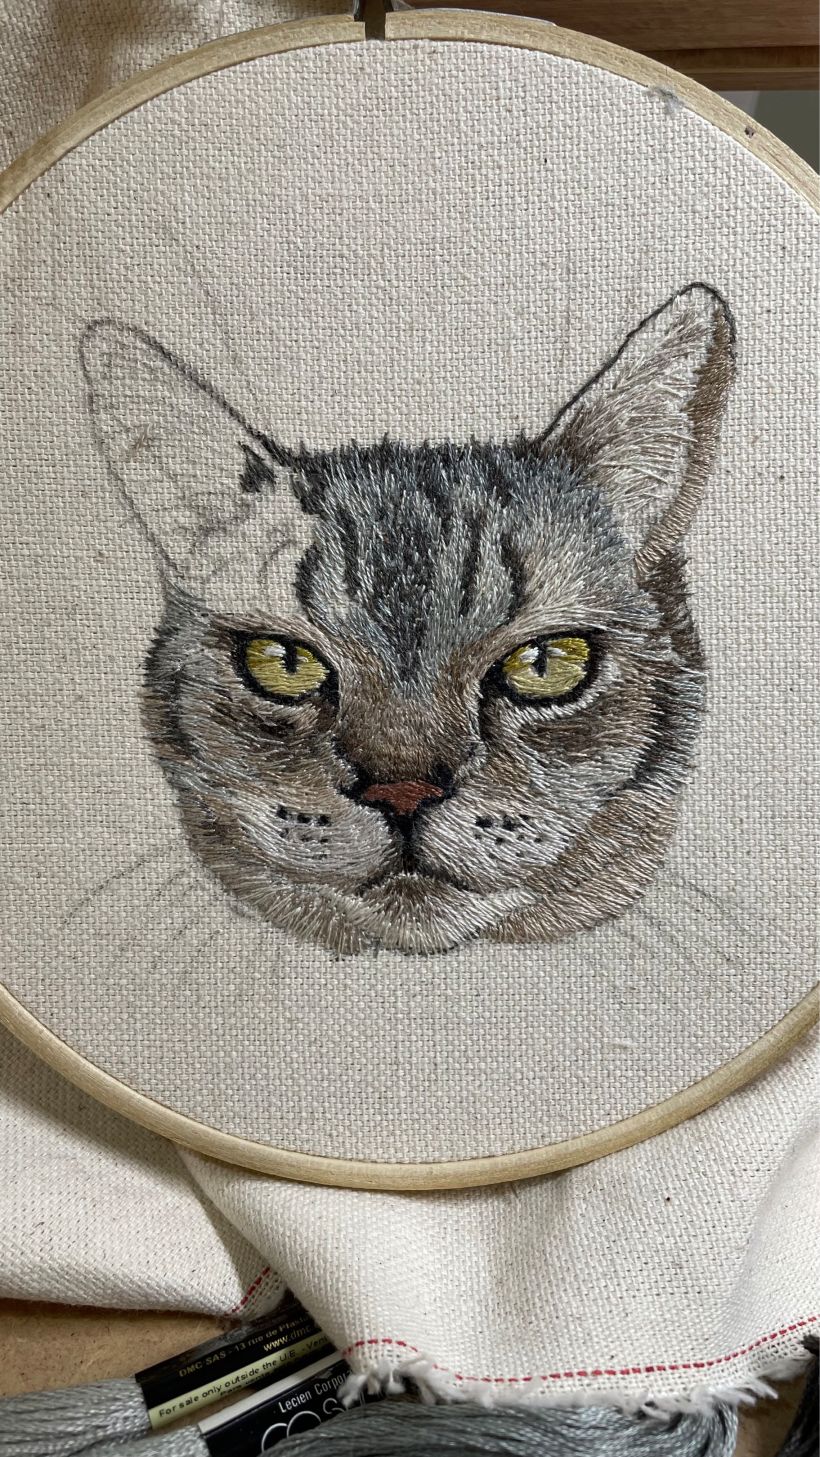 My project for course: Realistic Embroidery Techniques 5